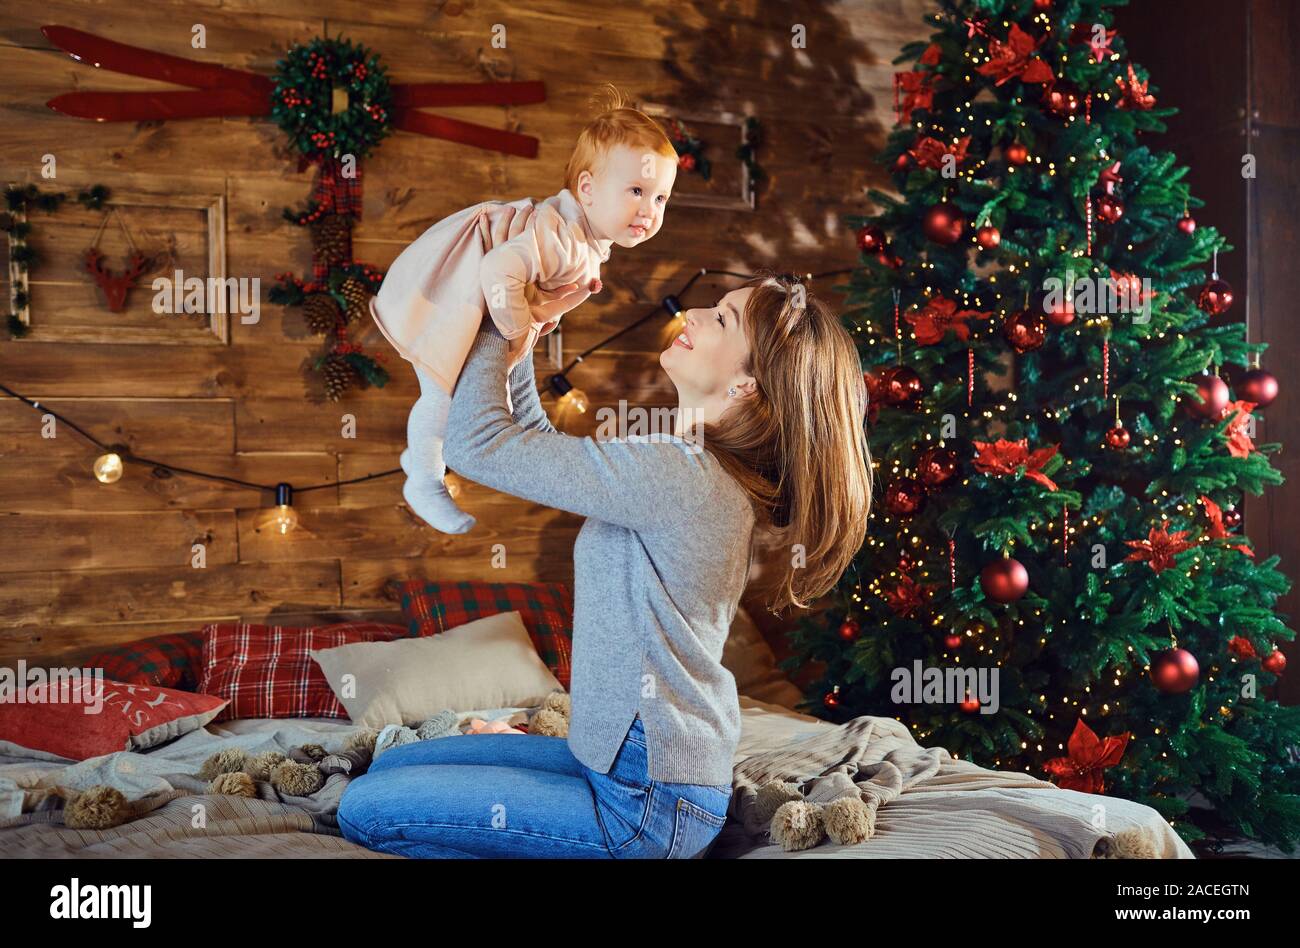 Young mother playing with baby near Christmas tree Stock Photo